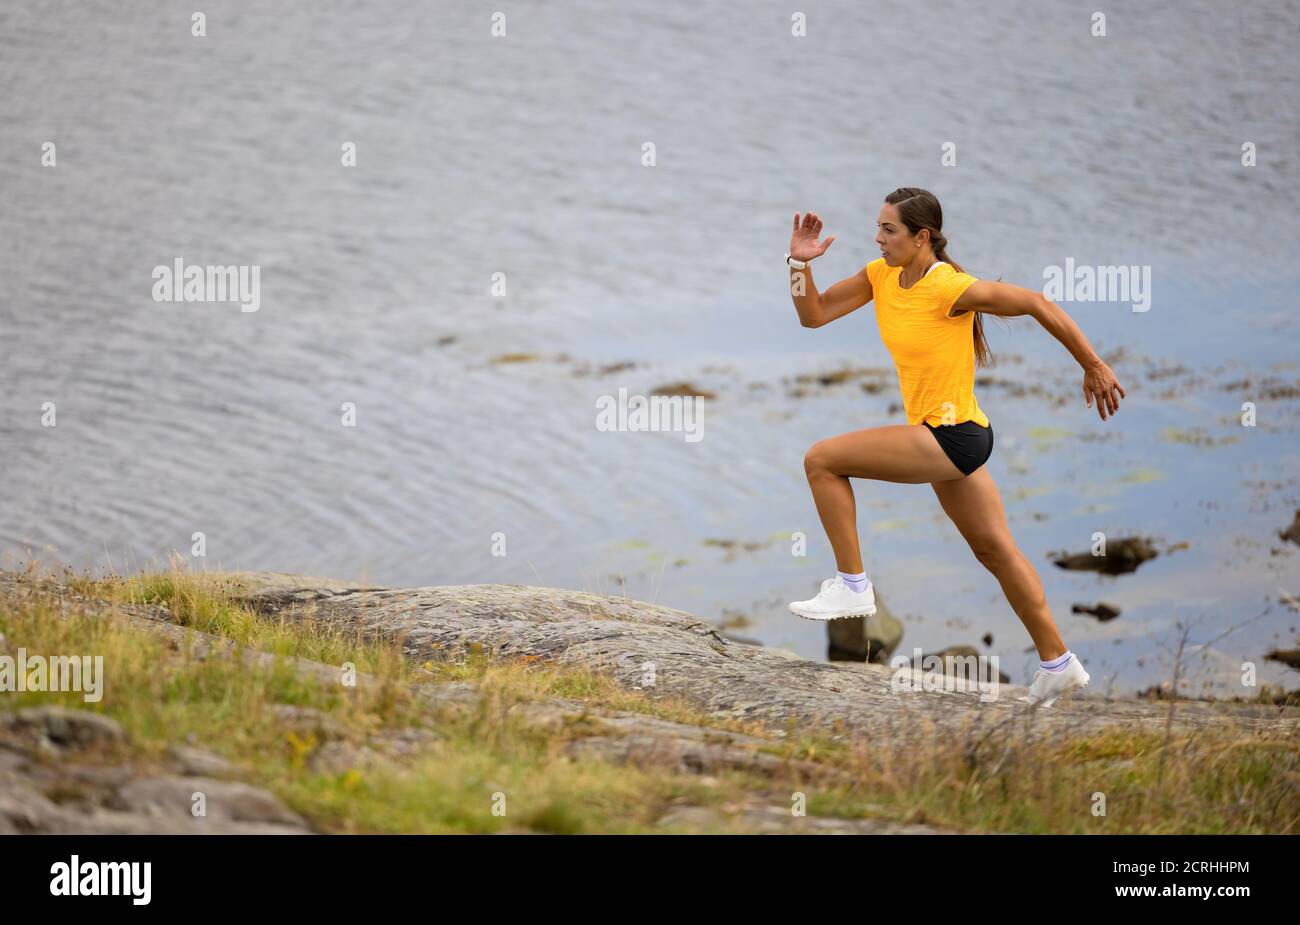 Focused fitness woman doing high-intensity running on mountainside by the sea Stock Photo